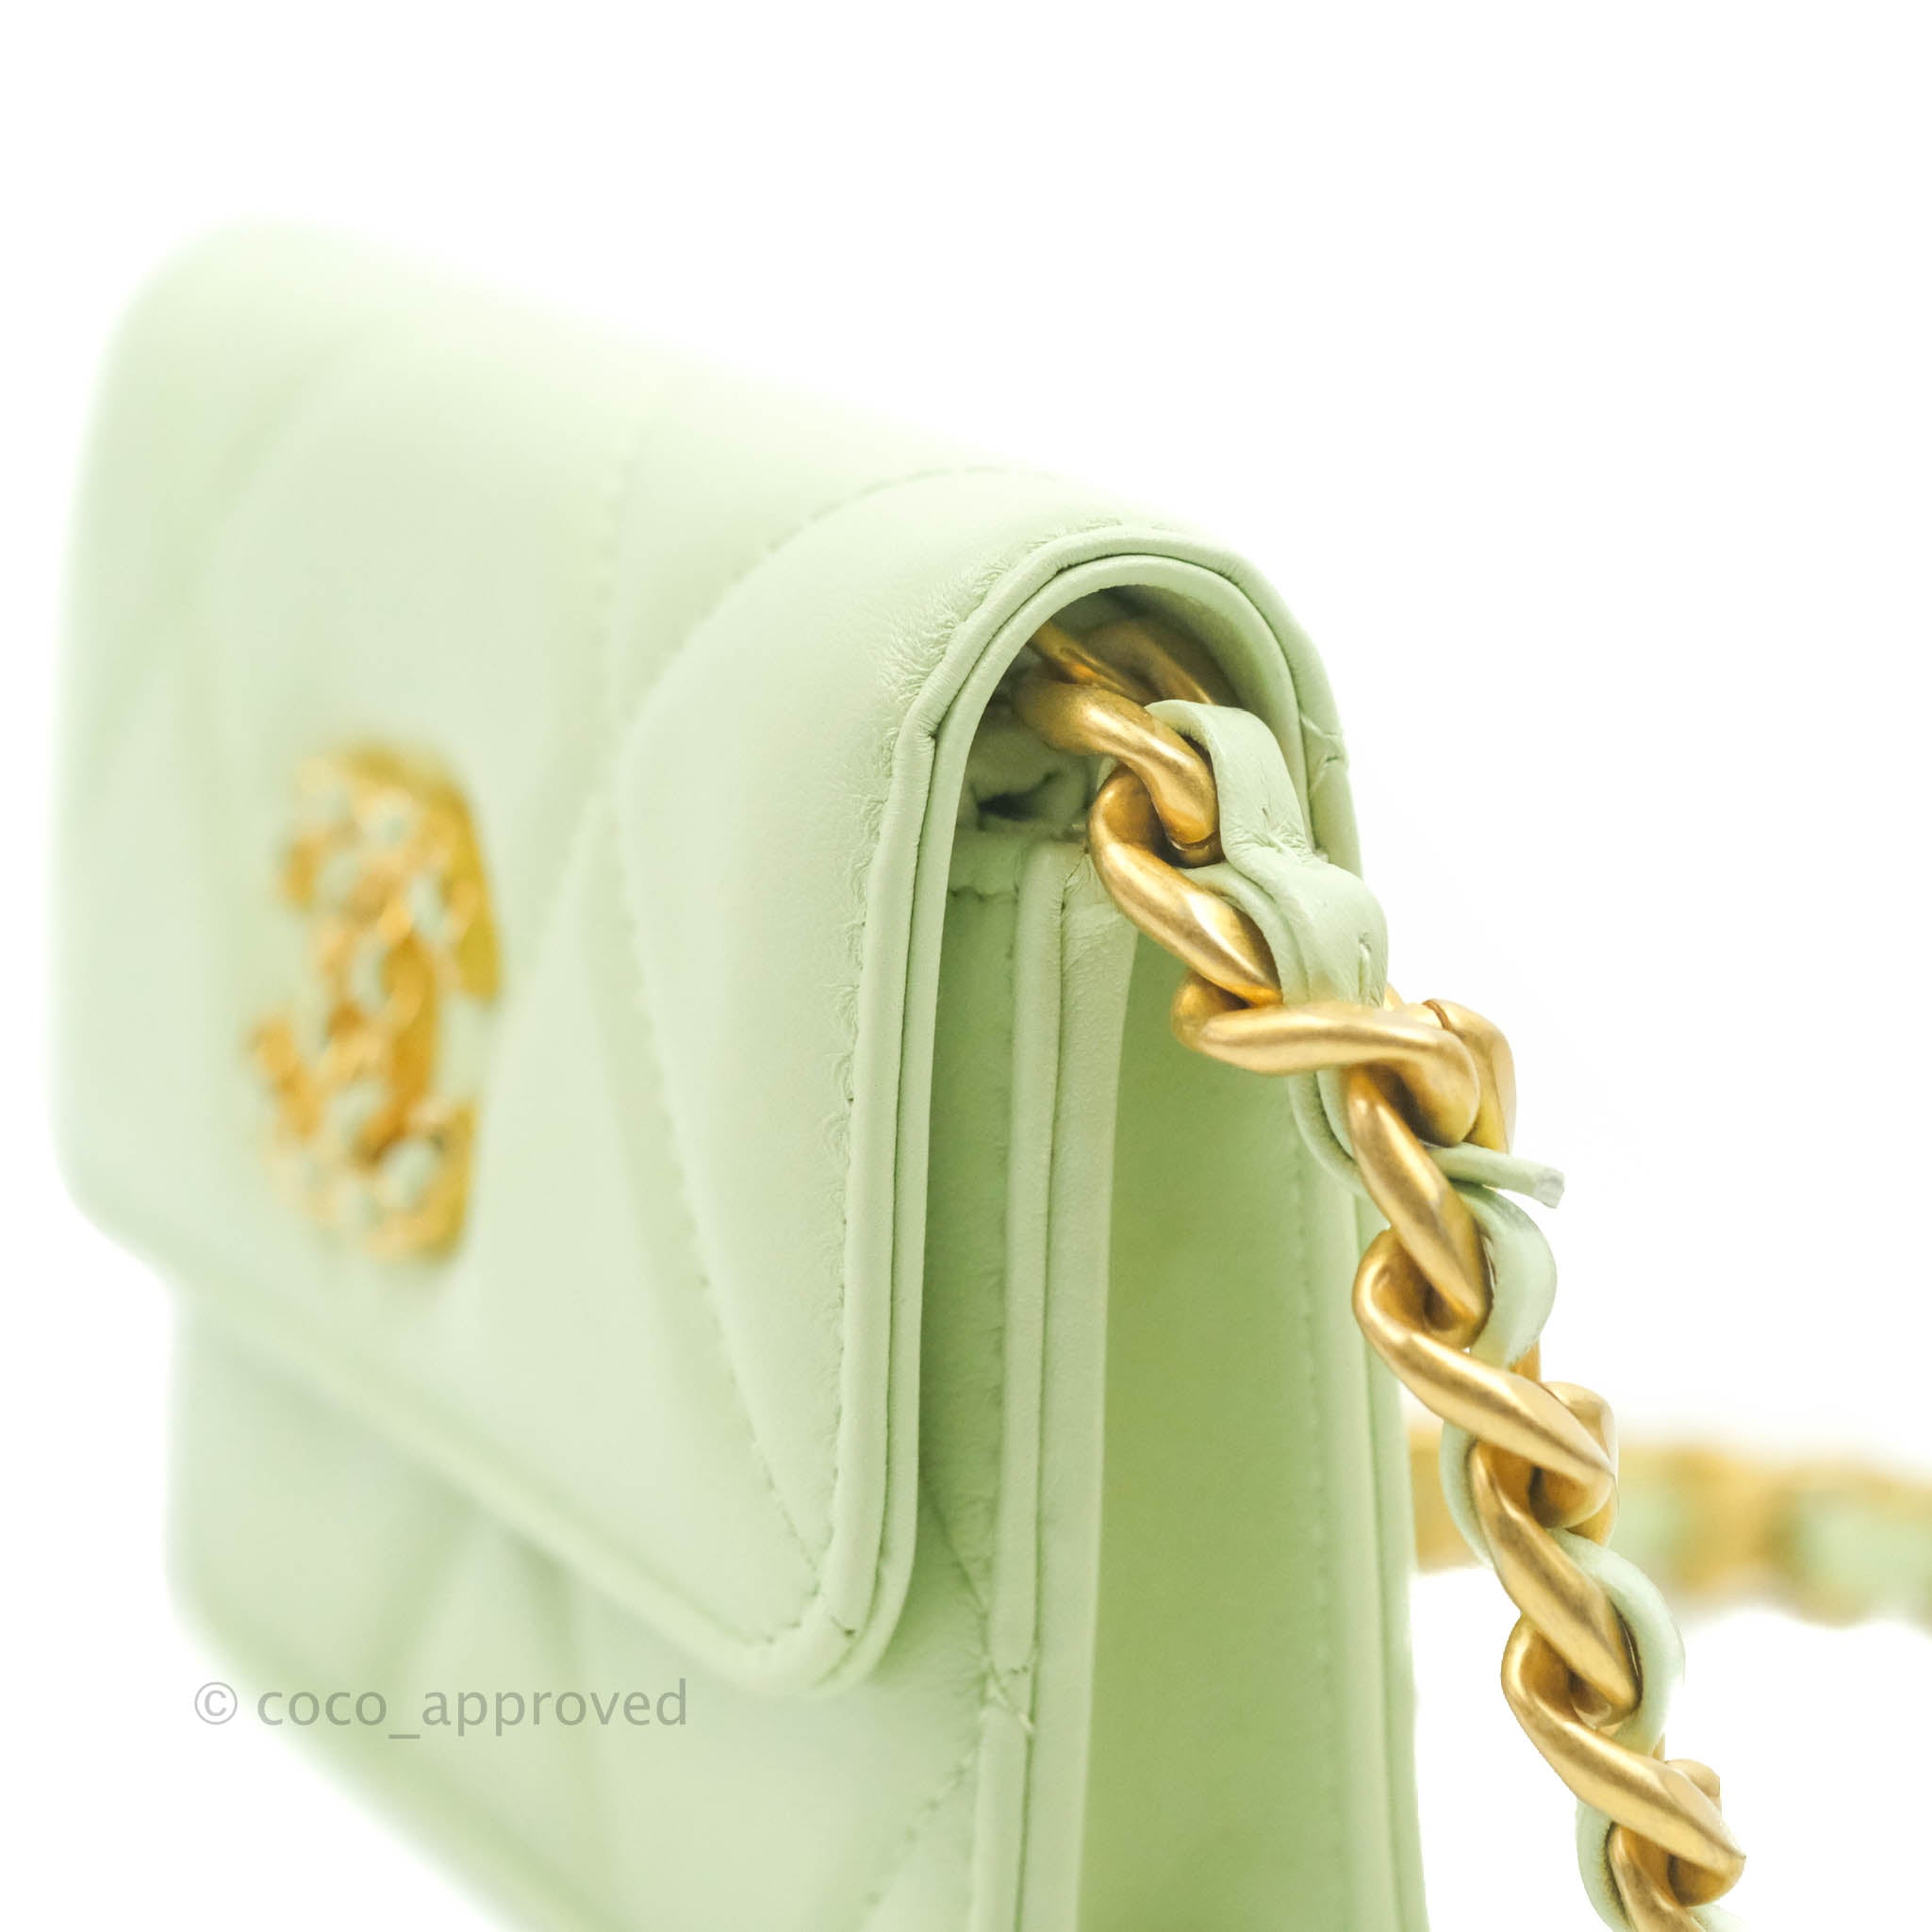 Chanel 19 Round Quilted Lambskin Leather Clutch Crossbody Bag Light Green